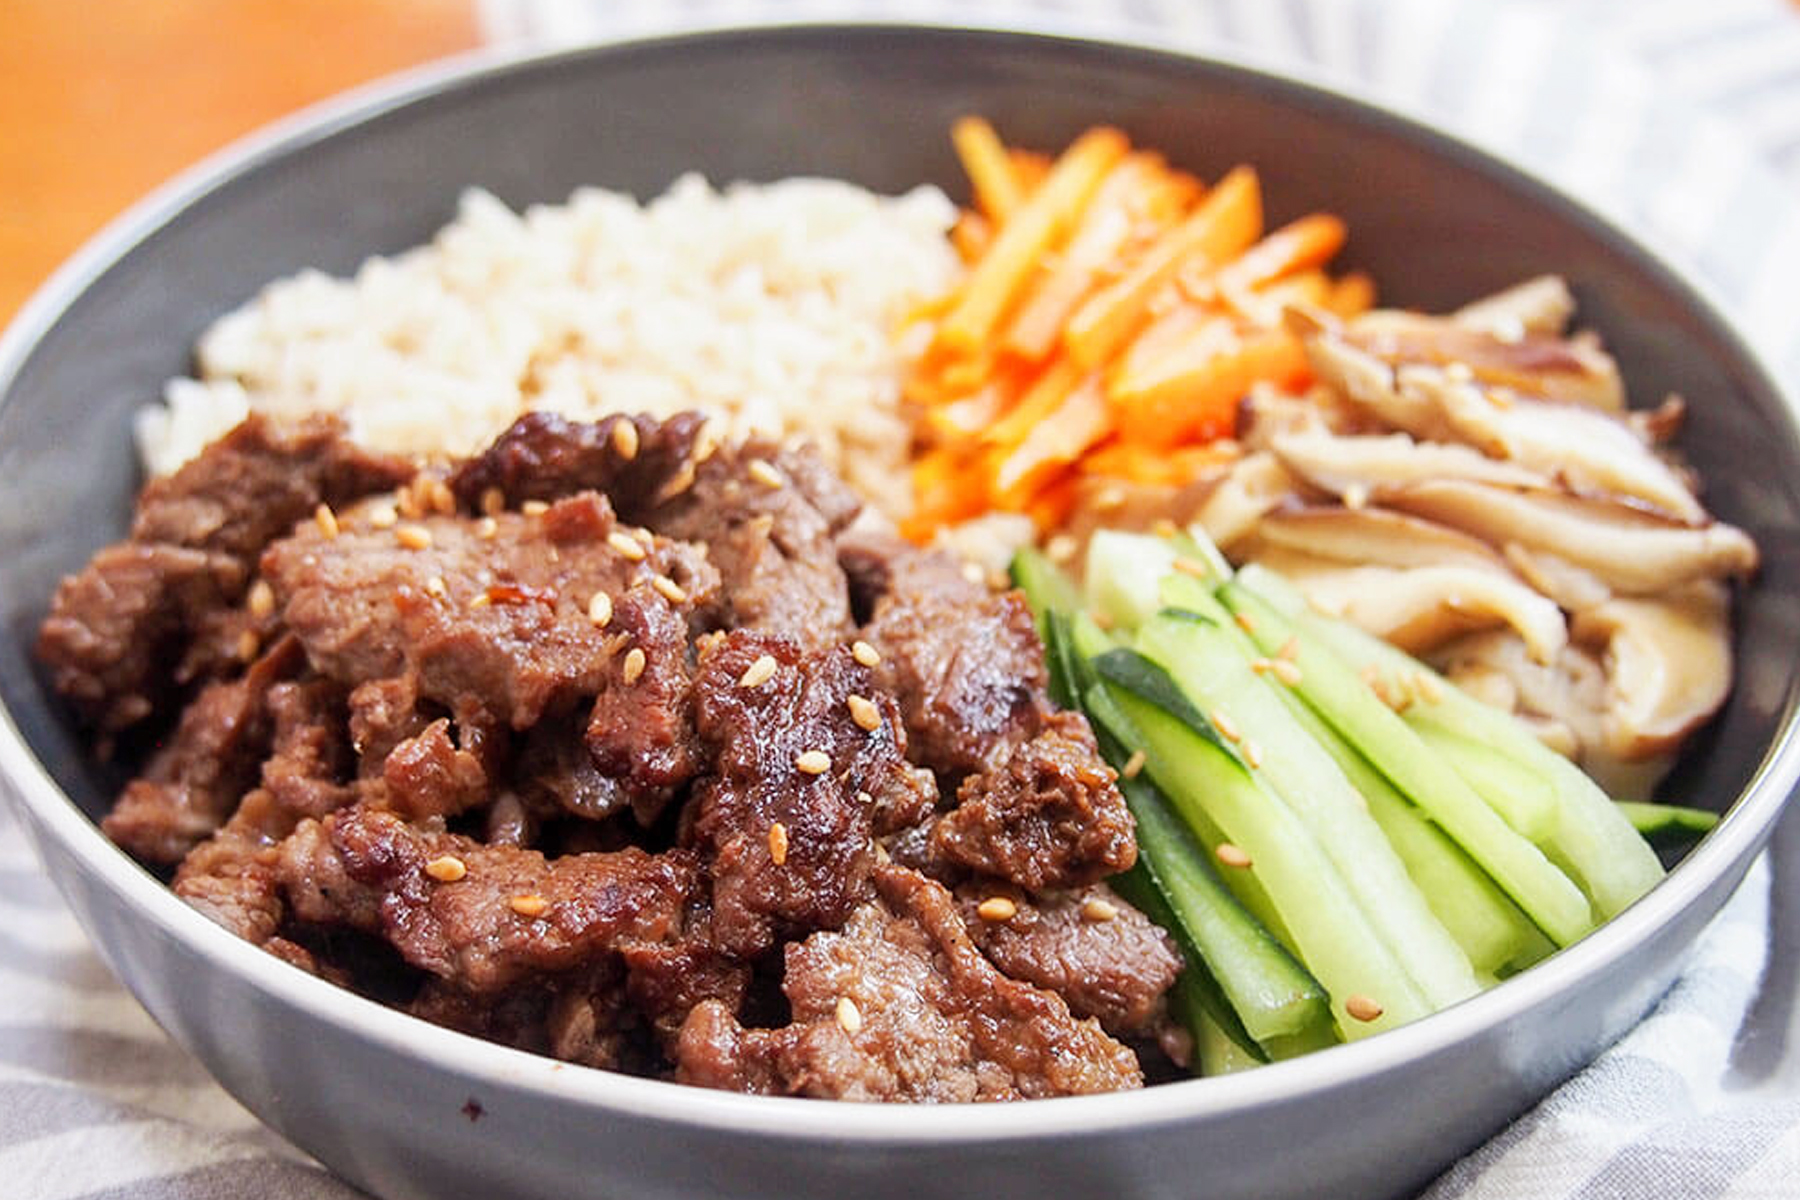 This grilled marinated beef dish is one of the most popular Korean meat dis...